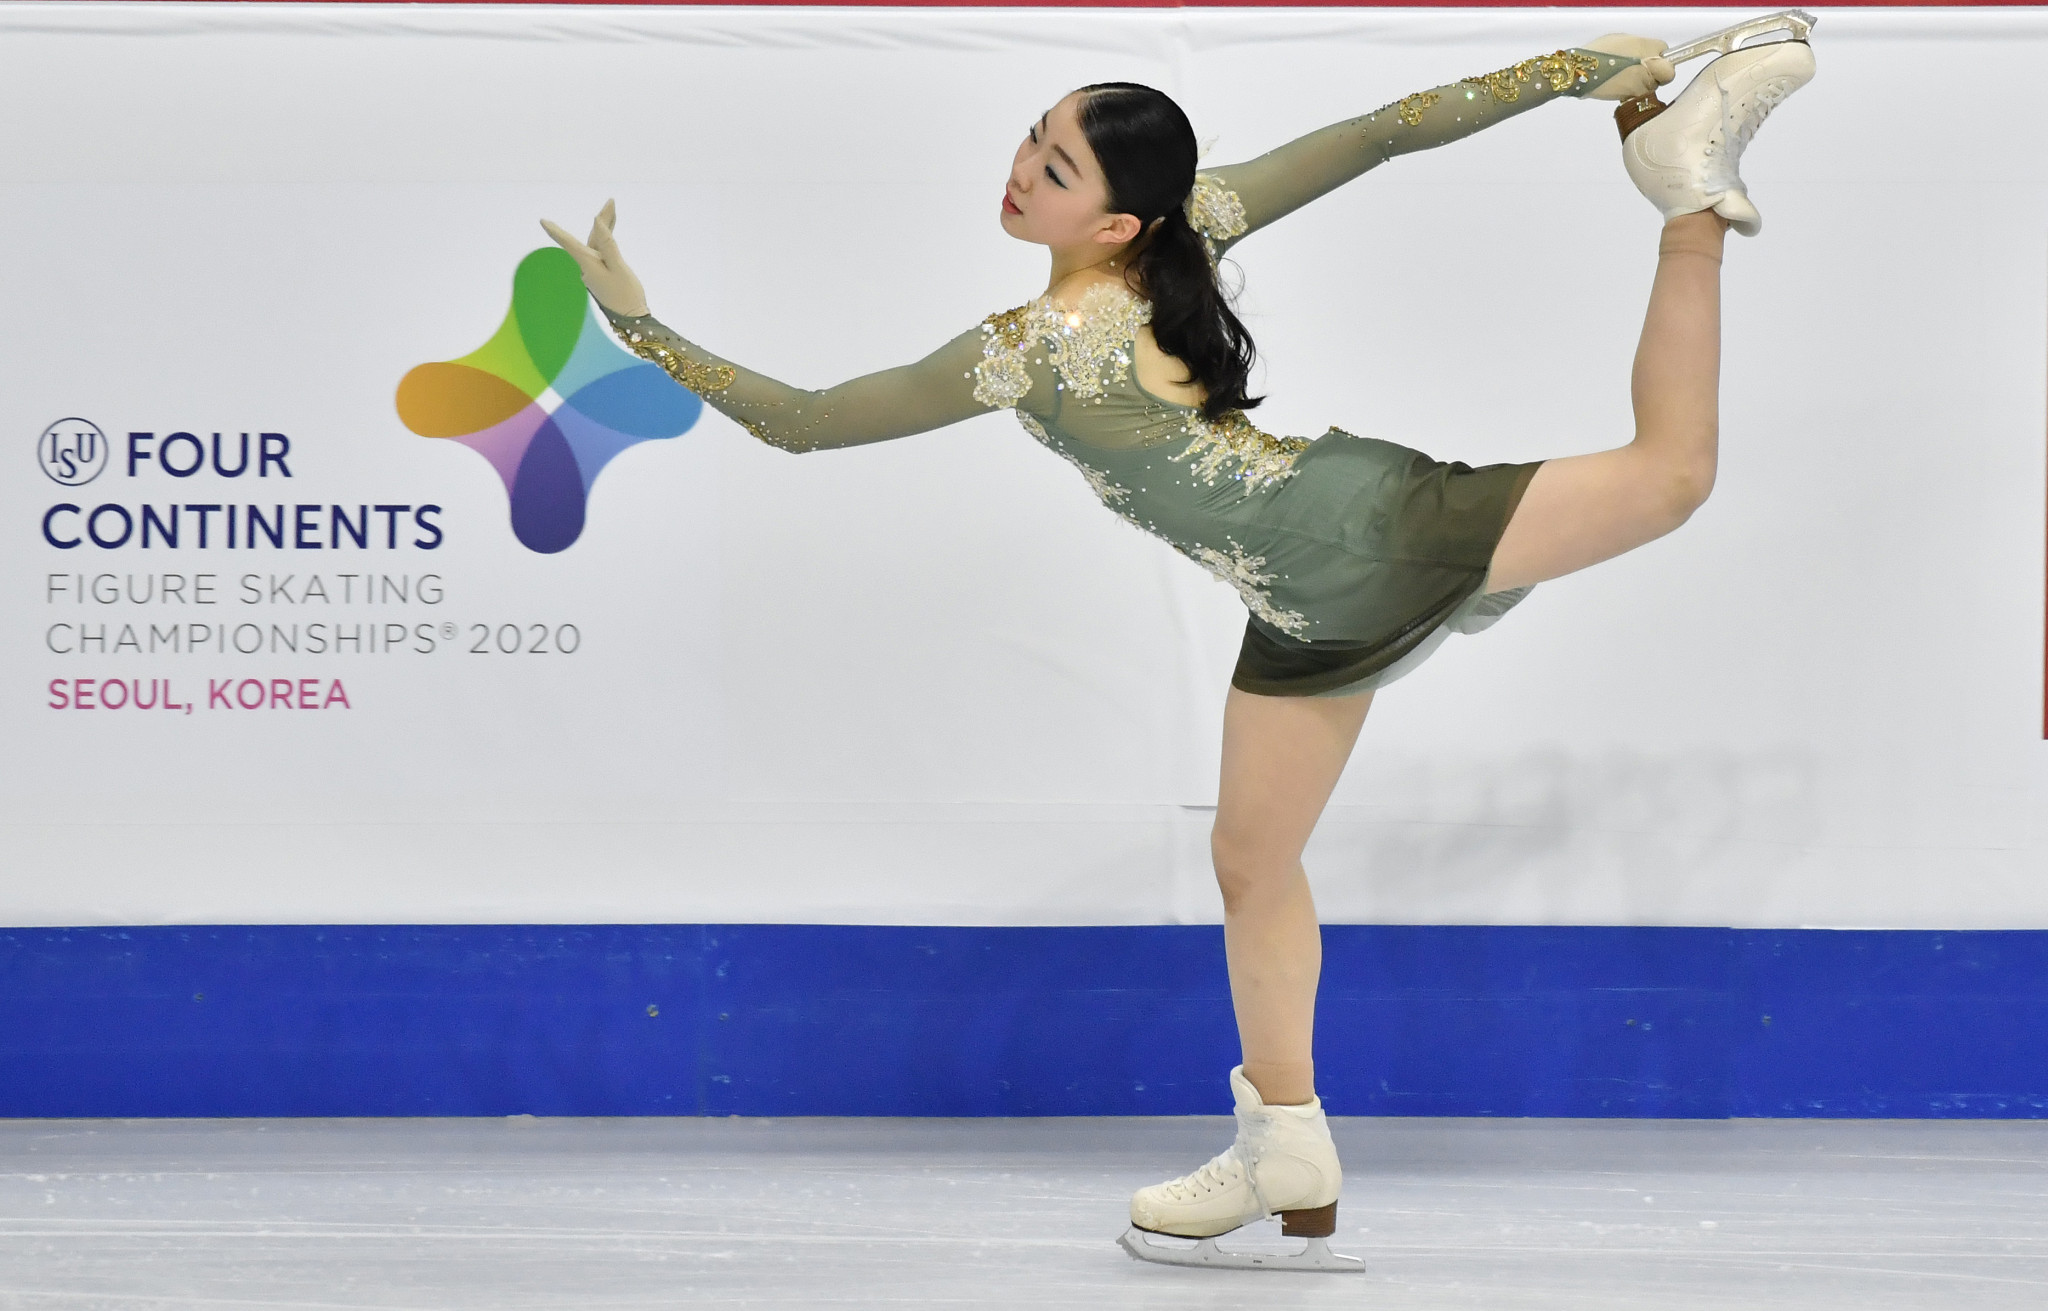 Seoul has previously held the Four Continents Figure Skating Championships in 2015 and 2020 ©Getty Images